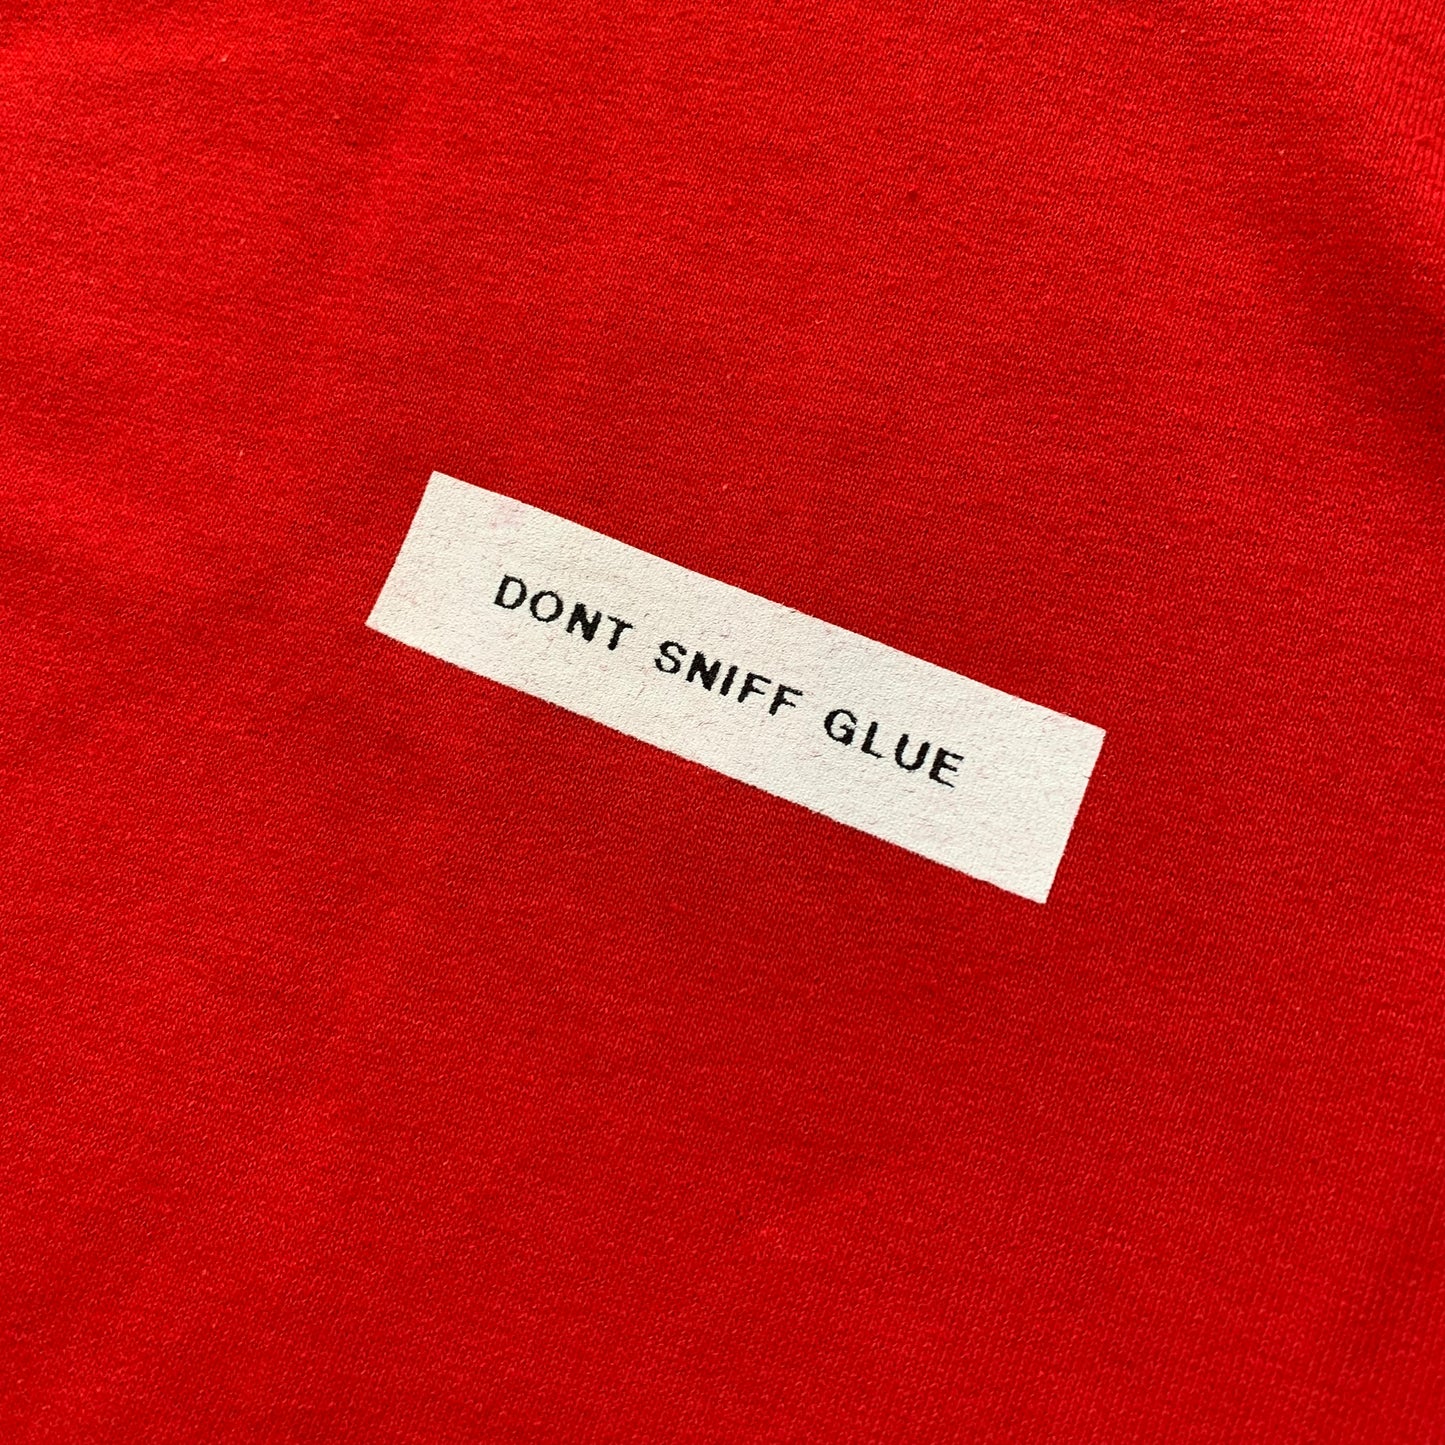 DONT SNIFF GLUE TEE